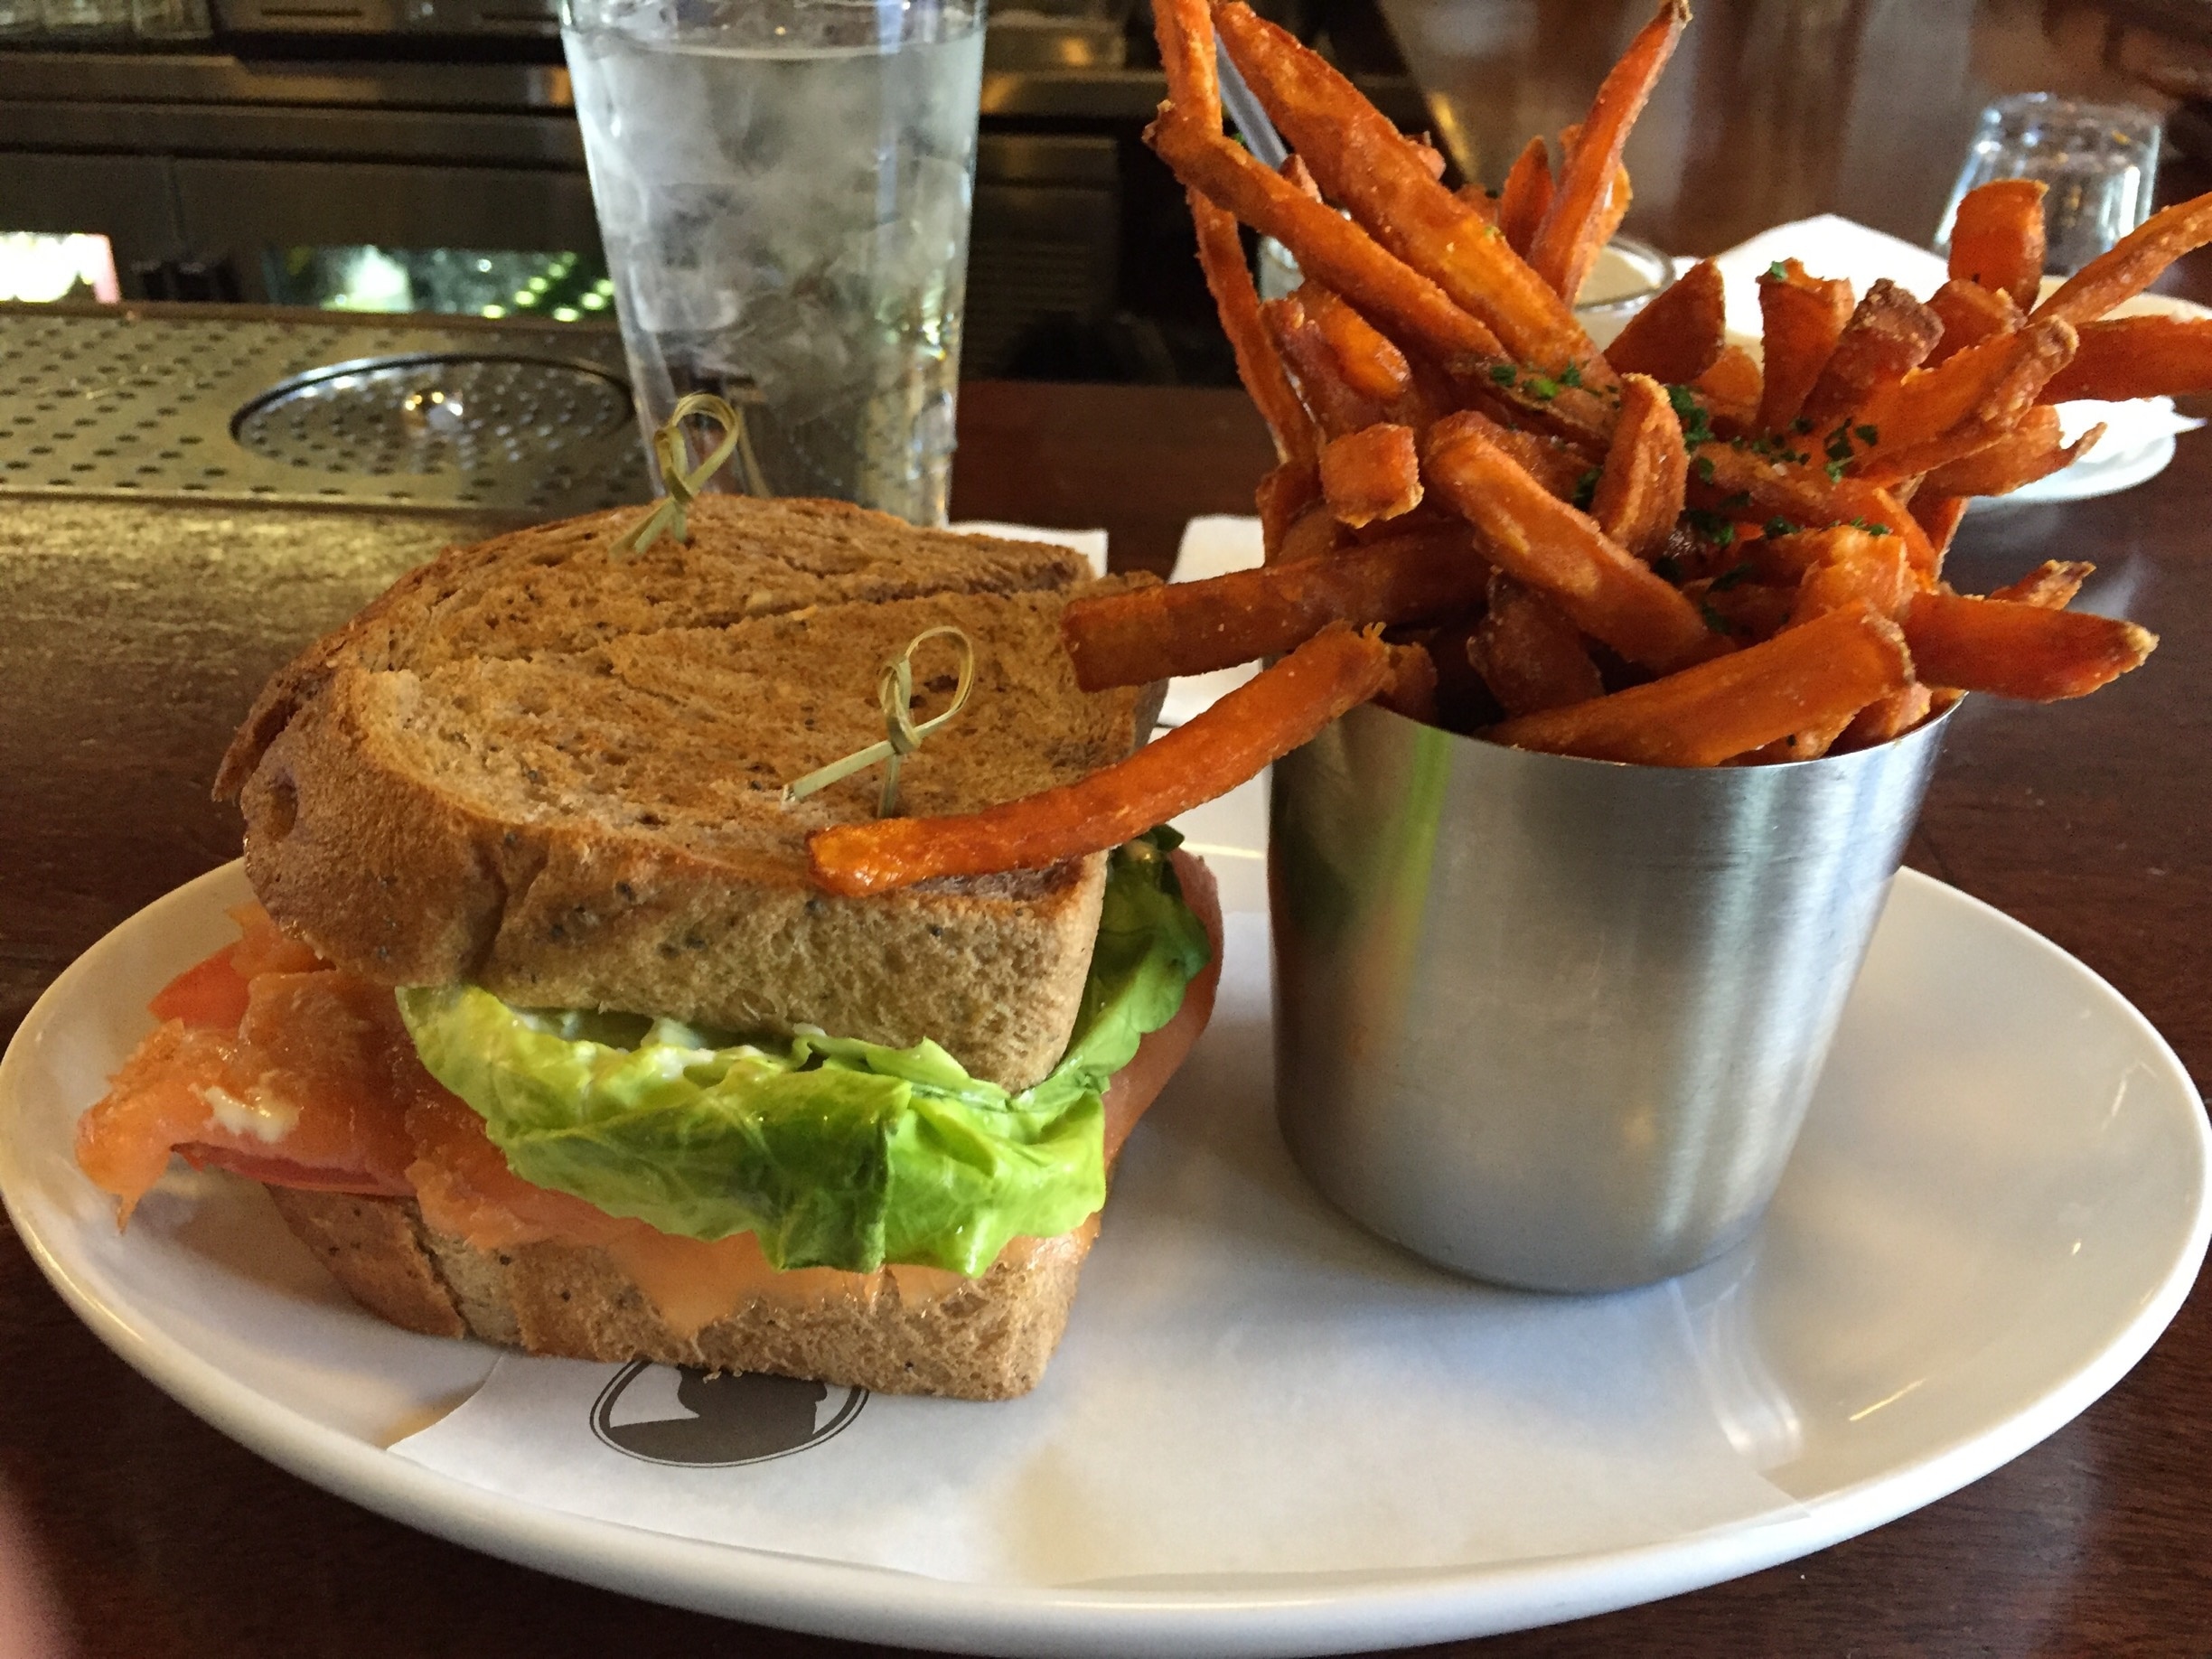 Great salmon BLT with sweet potato fries